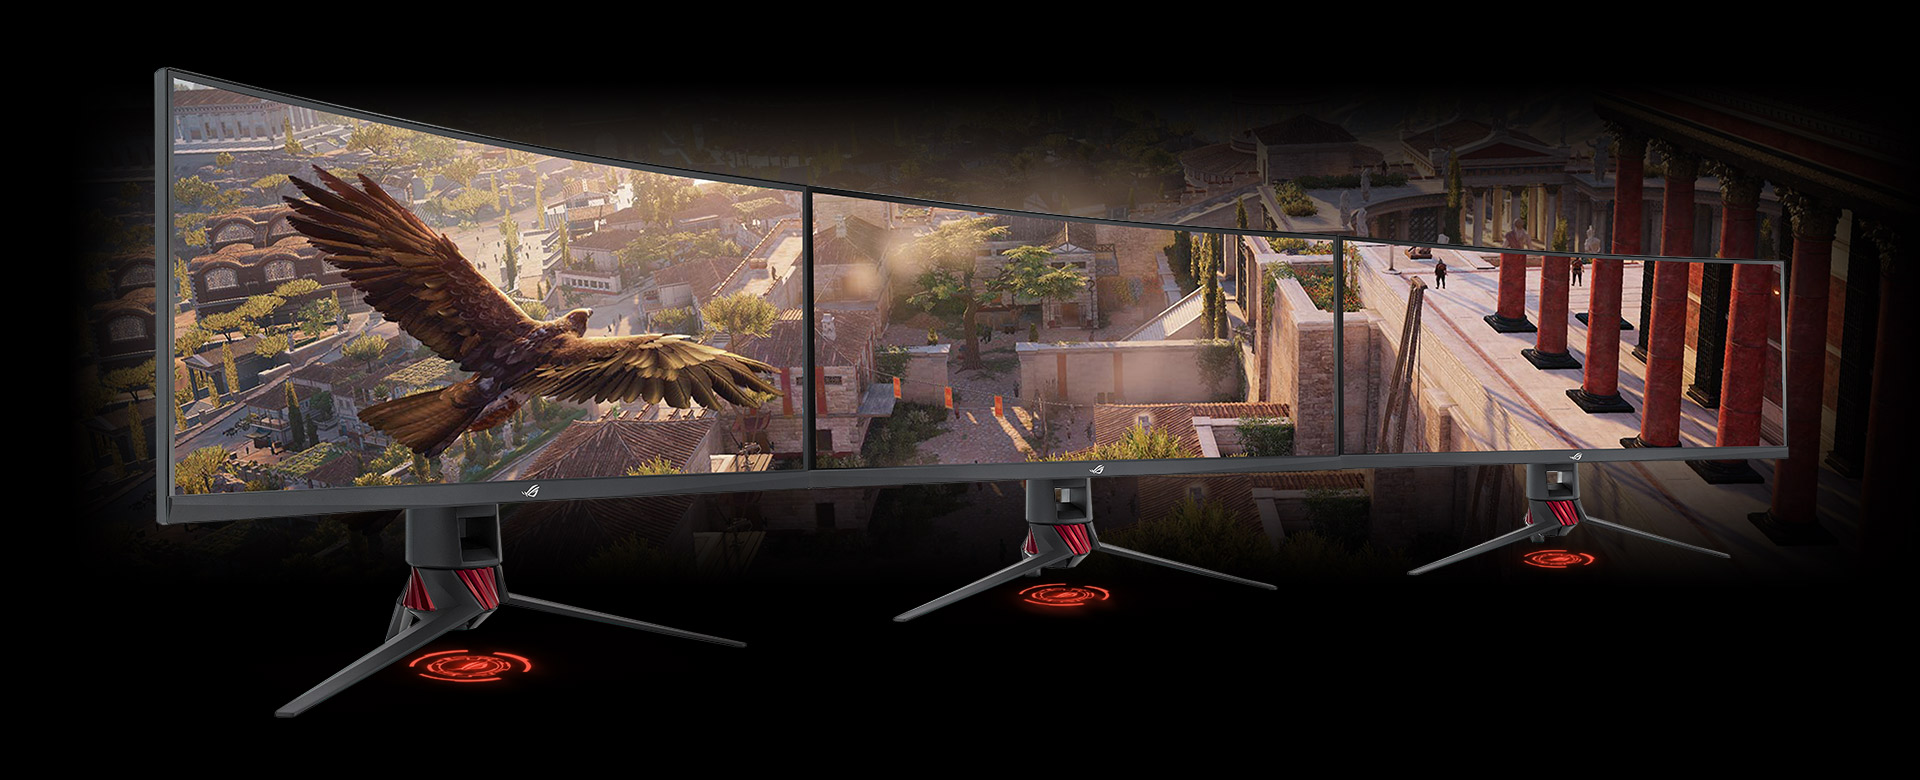 A Set of Three Monitors Side by Side, Forming a Connected Display with an eagle is flying crossing the city as screen